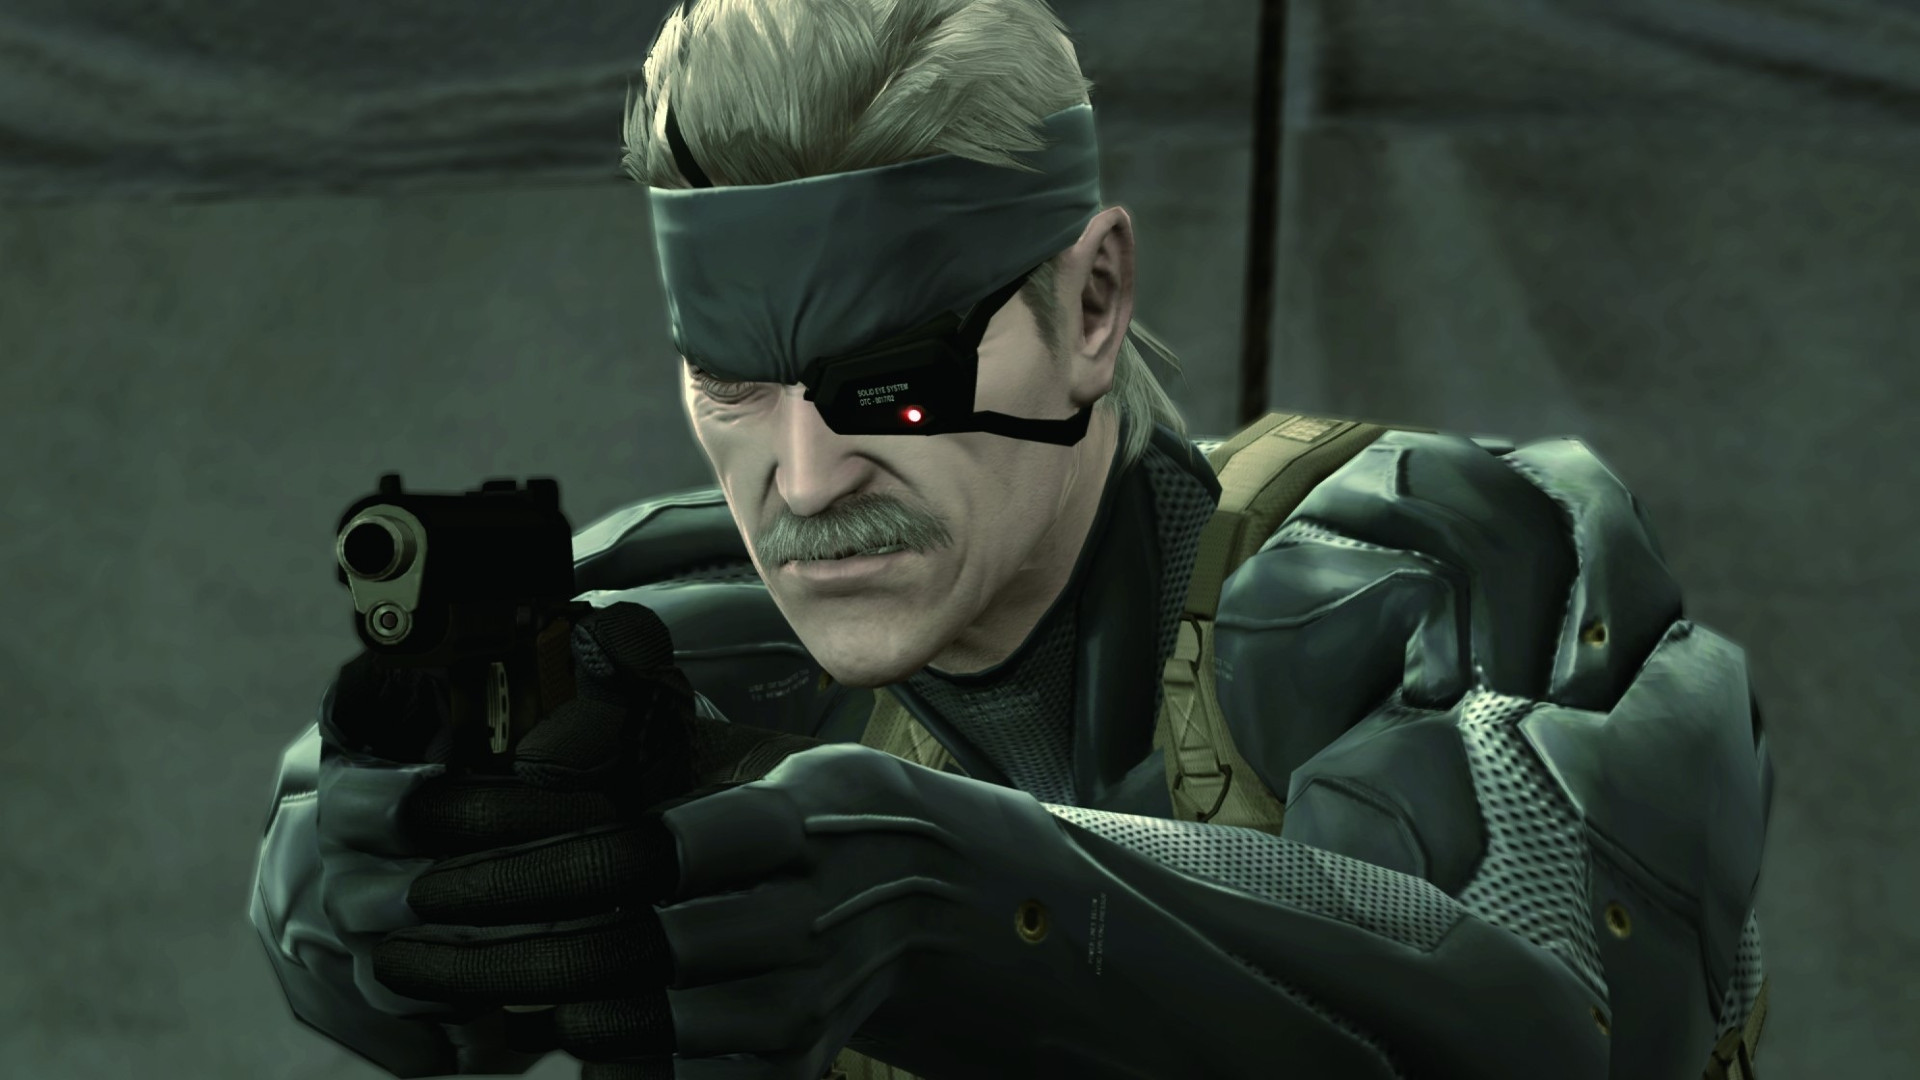 Metal Gear Solid Movie Director Wants To Create An Animated Series With Original Snake Voice Actor Gamesradar